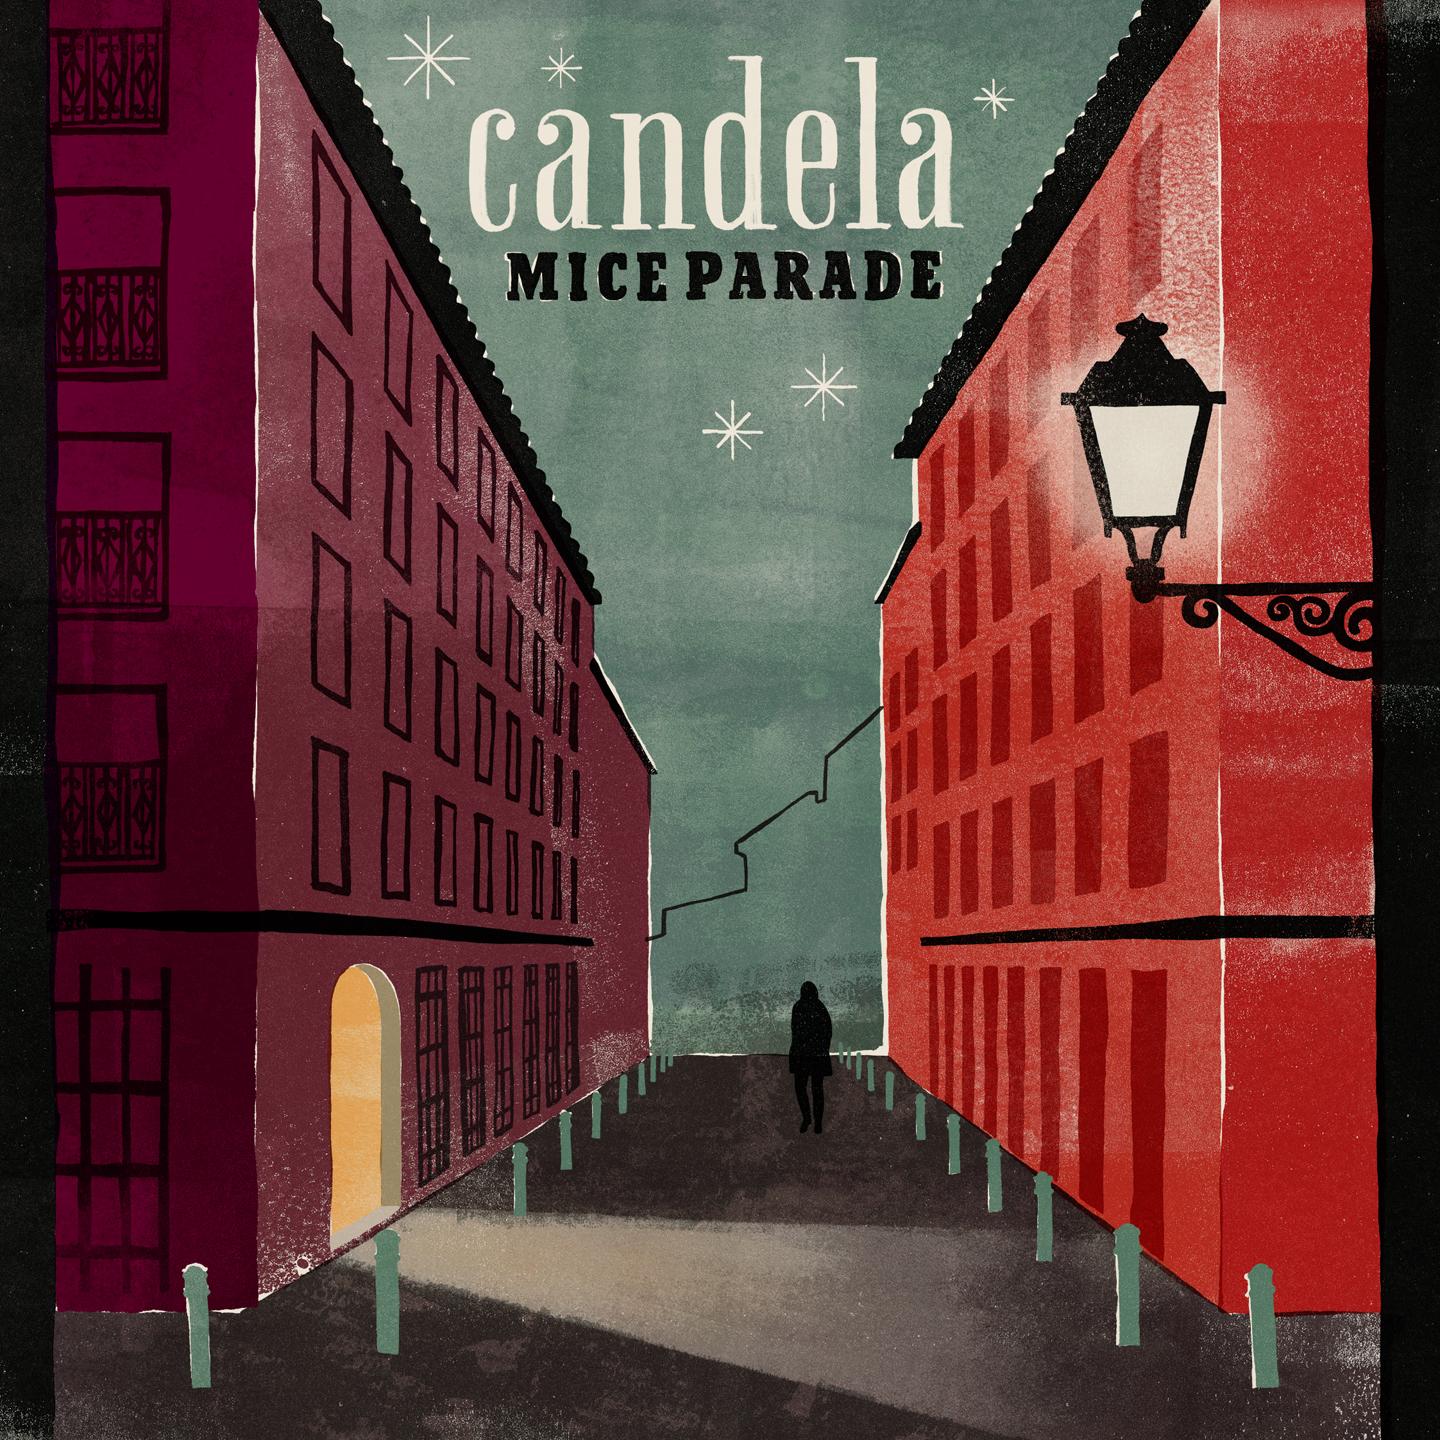 News Added Jan 02, 2013 Mice Parade is Adam Pierce. Candela is his new album. Electronic/Rock Submitted By Manuel Track list: Added Jan 02, 2013 1) Listen Hear.. 2) Curents 3) This River Has a Tide 4) Pretending 5) The Chill House 6) Candela 7) Look See Dream Me 8) Las Gentes Interesantes 9) Contessa […]